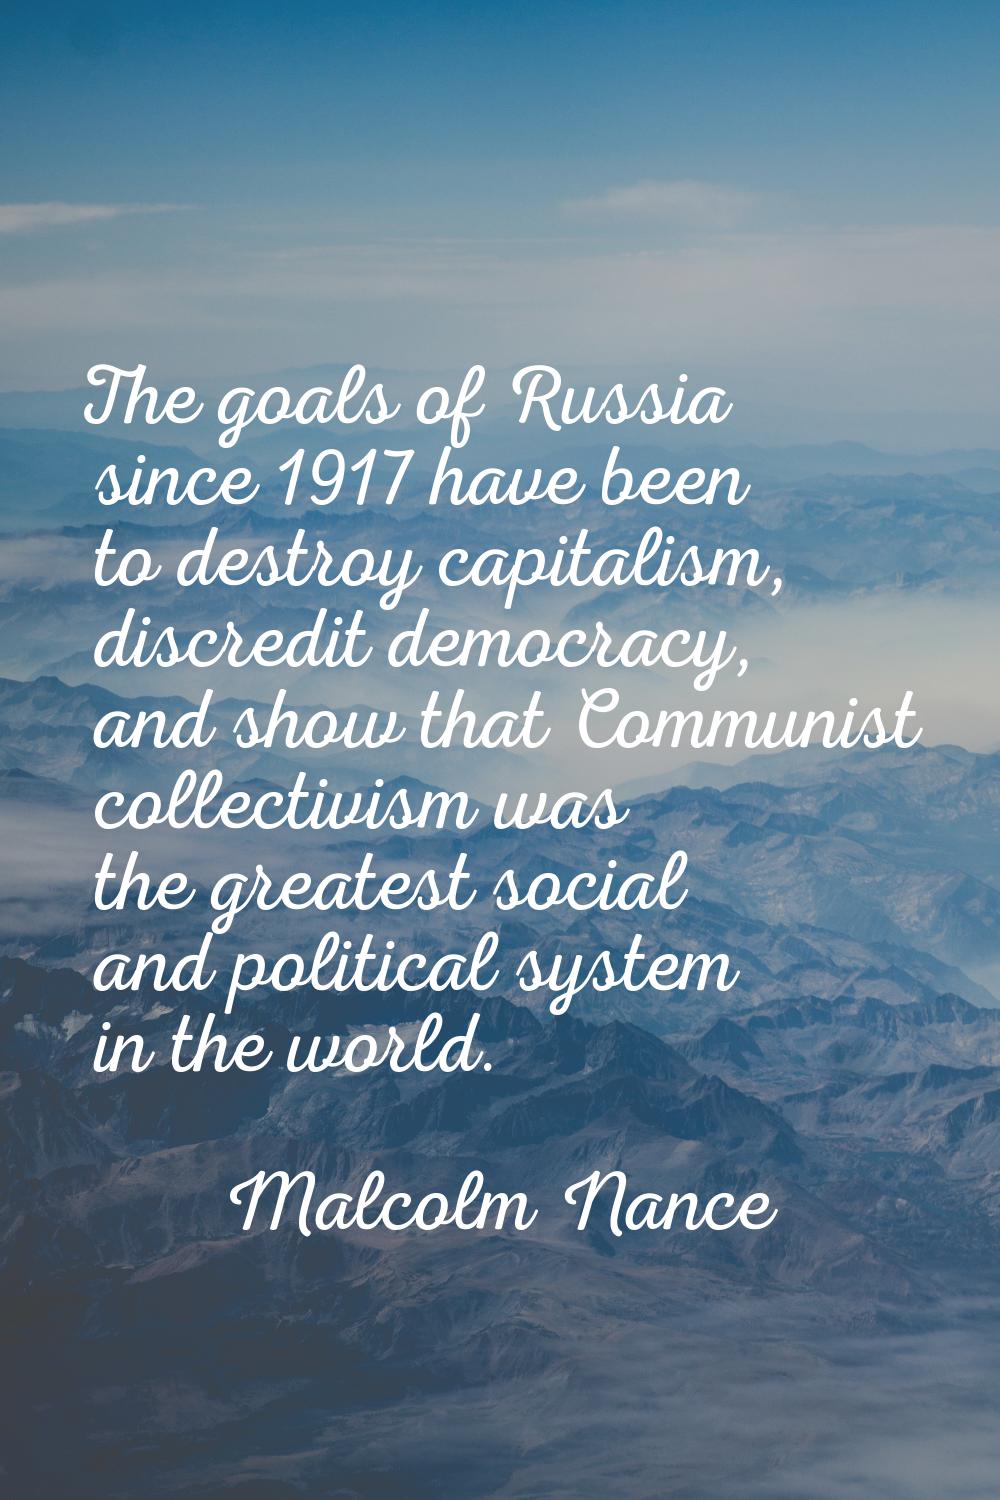 The goals of Russia since 1917 have been to destroy capitalism, discredit democracy, and show that 